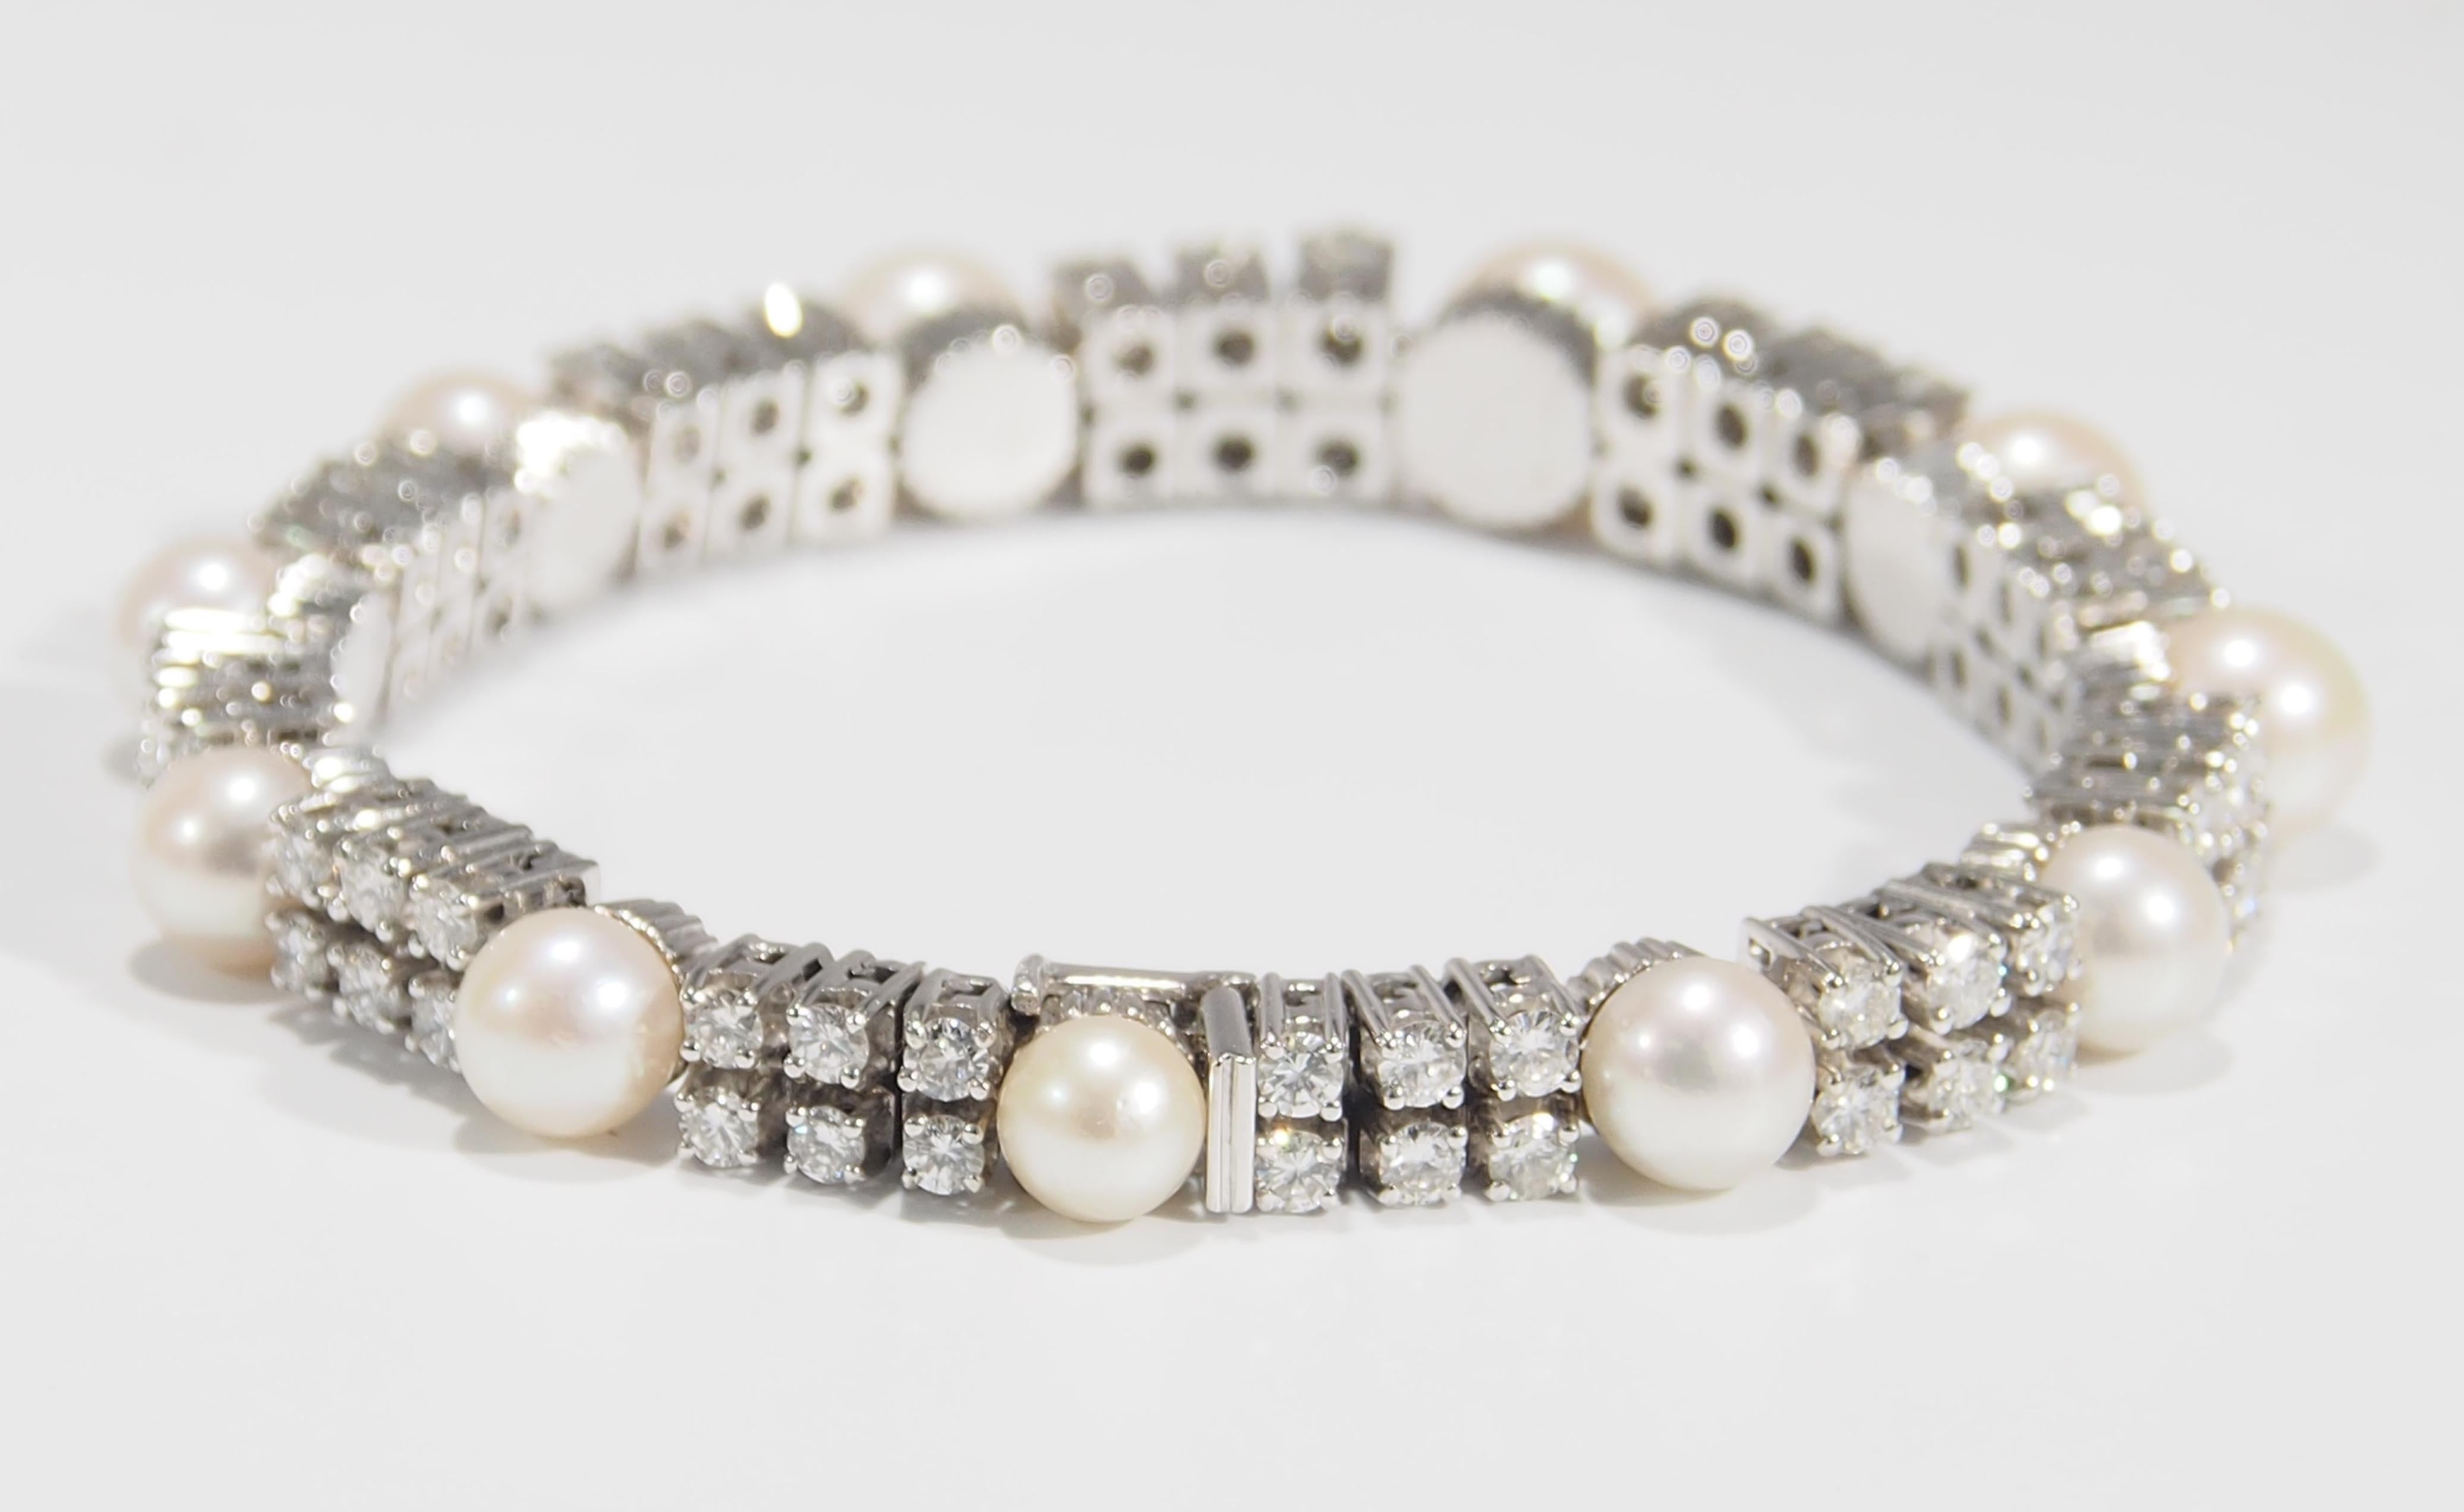 This is a classic Diamond and Pearl Bracelet fashioned in 14K White Gold. The Bracelet sparkles with (66) Round Brilliant Cut Diamonds, approximately 6.30ctw, G-H in Color, VS in Clarity. The Diamonds are set in Groups of (6) that alternate with